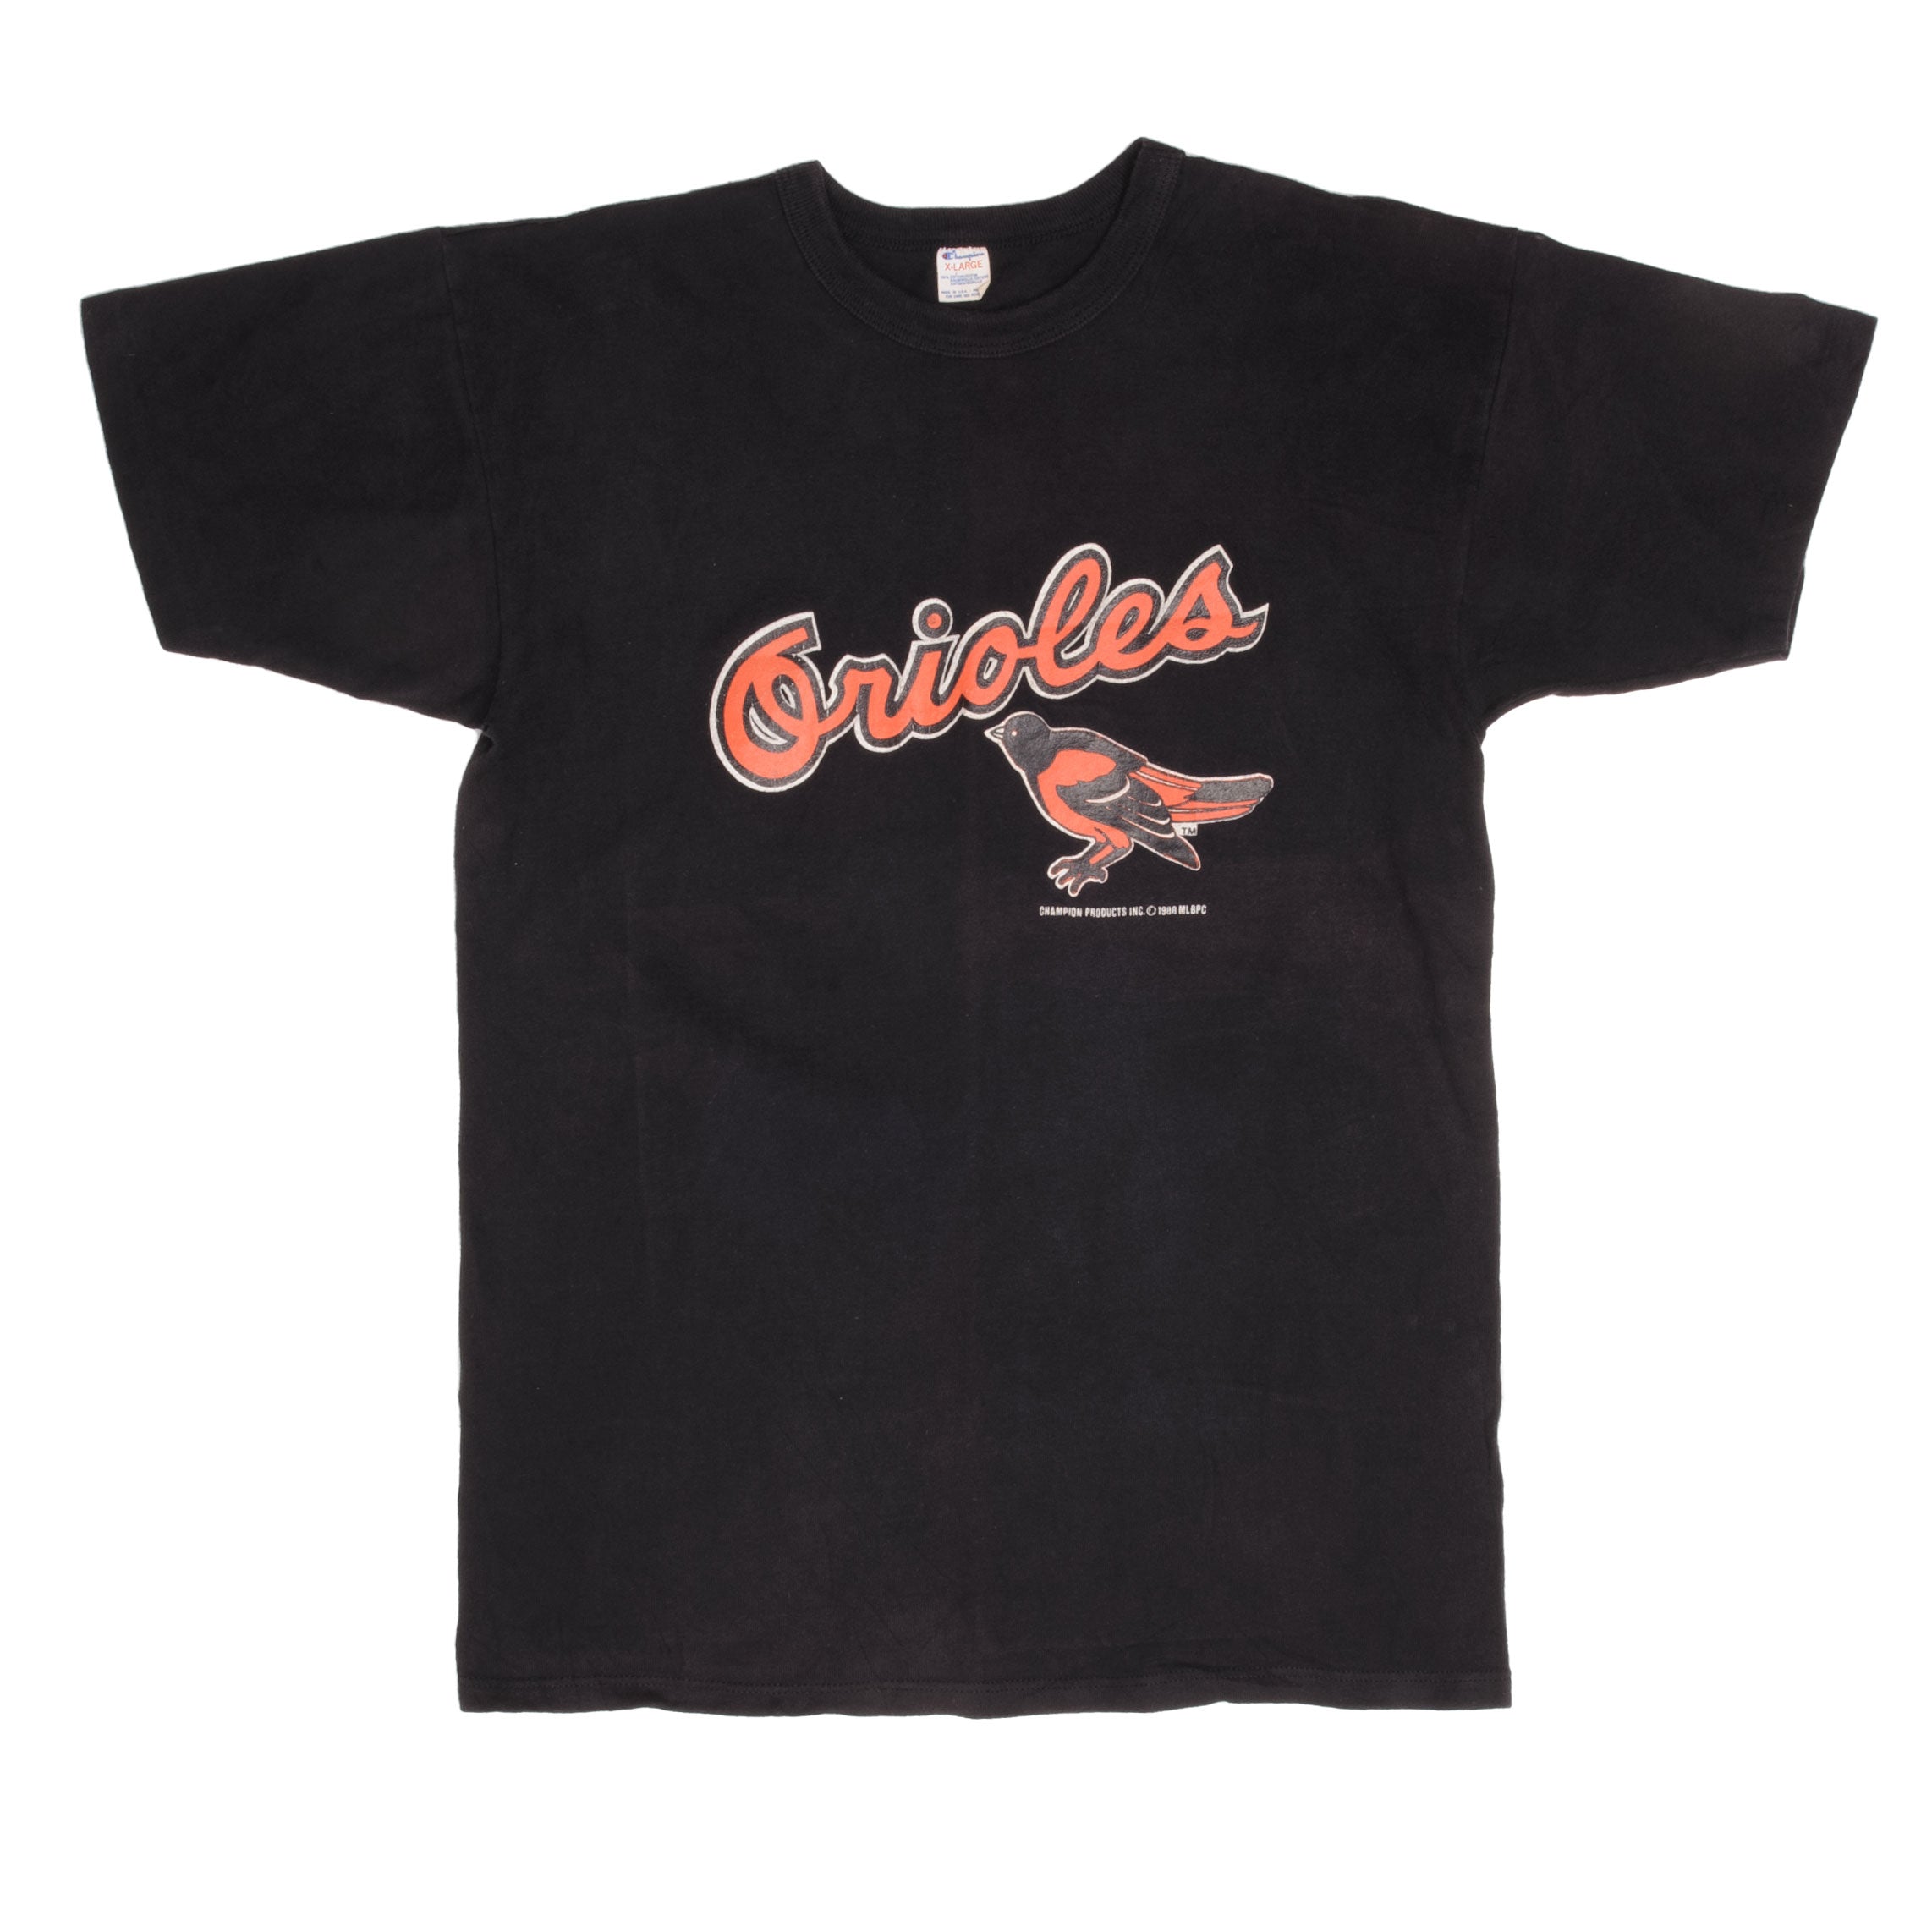 BALTIMORE ORIOLES VINTAGE 1988 TRENCH T-SHIRT ADULT LARGE